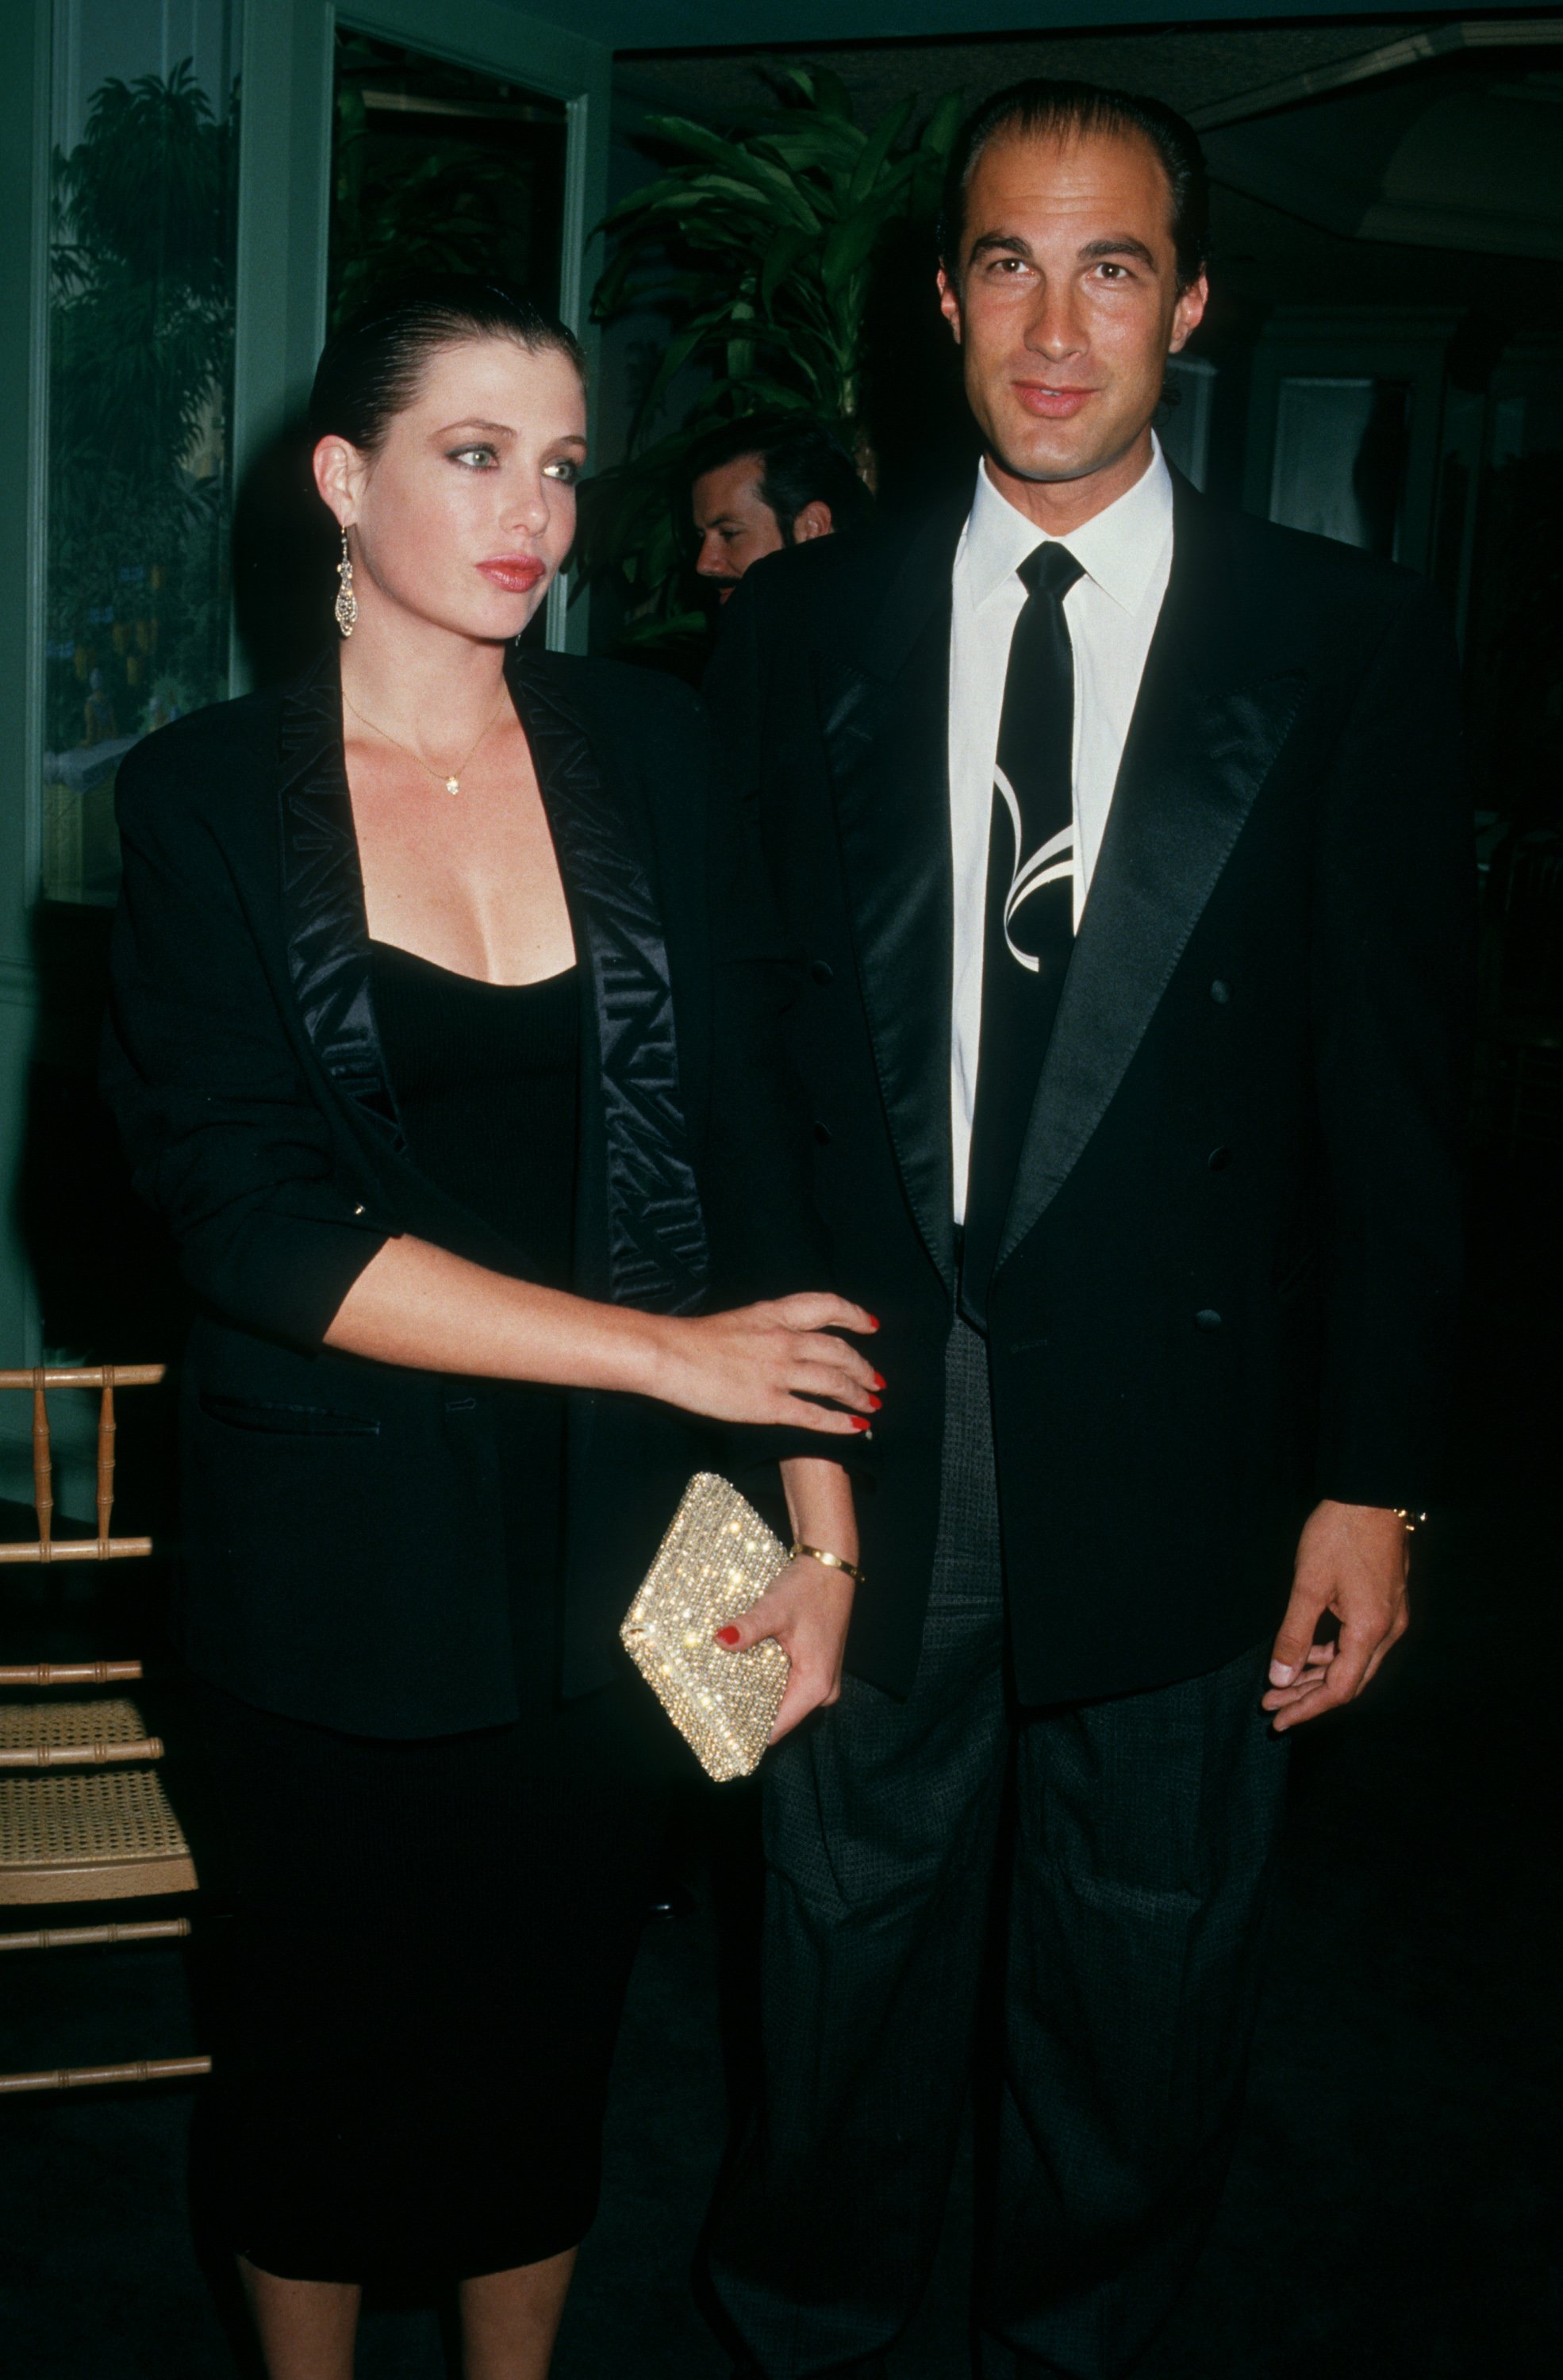 Kelly LeBrock and Steven Seagal attend "Ted Kennedy Painting Dinner Benefiting Very Special Arts' at Jimmy's Restaurant on November 20, 1987 in Beverly Hills, California. / Source: Getty Images